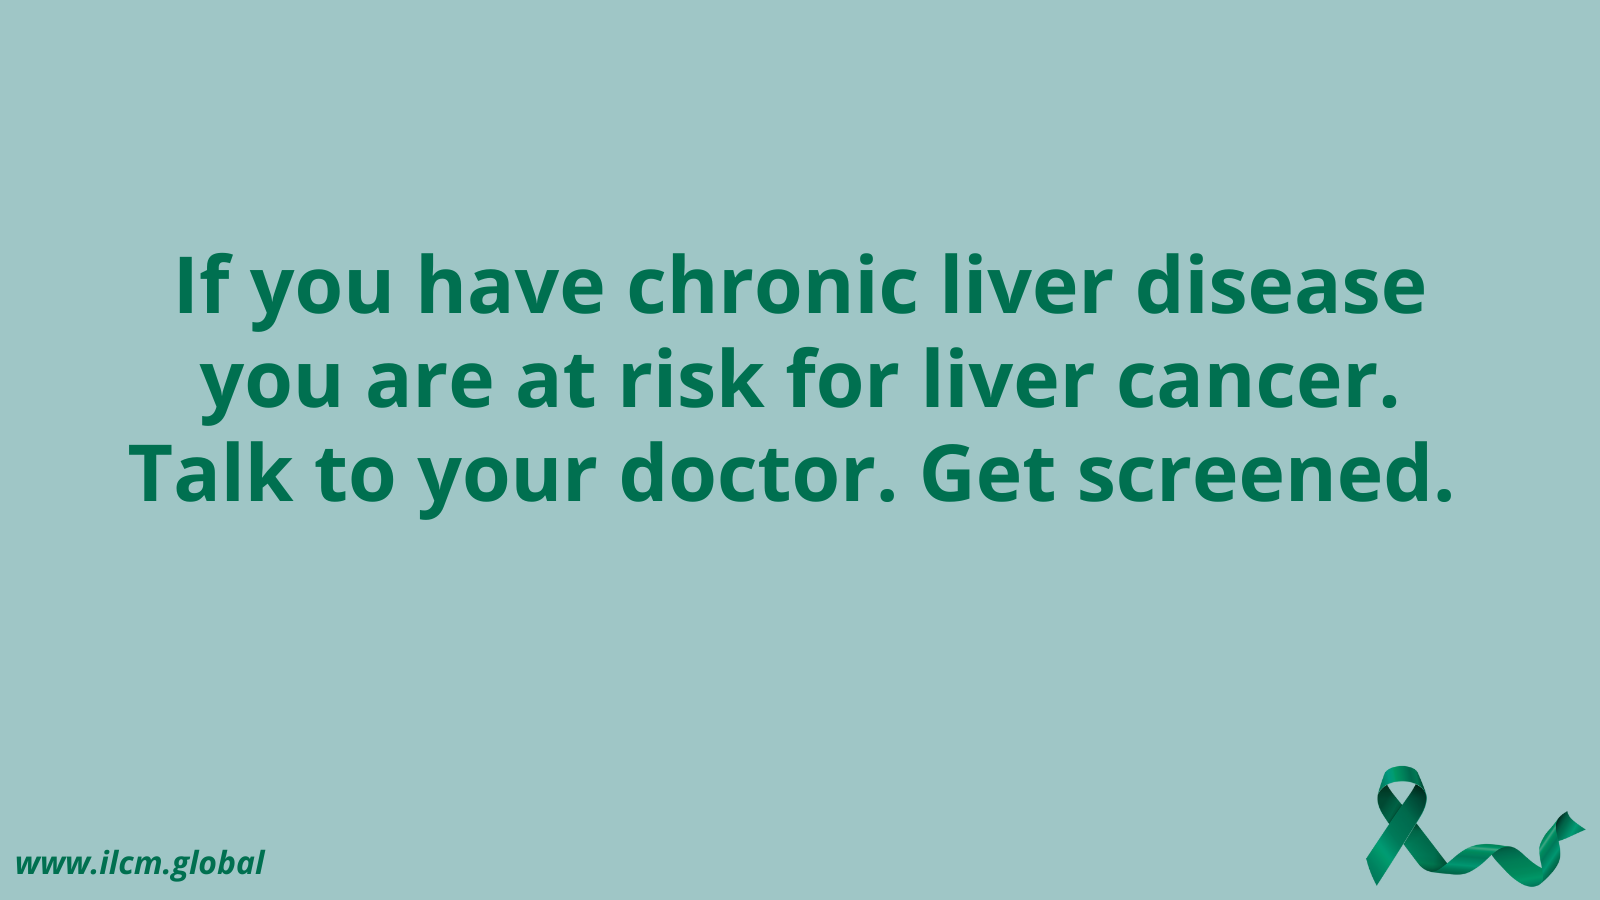 If you have liver disease you are at risk